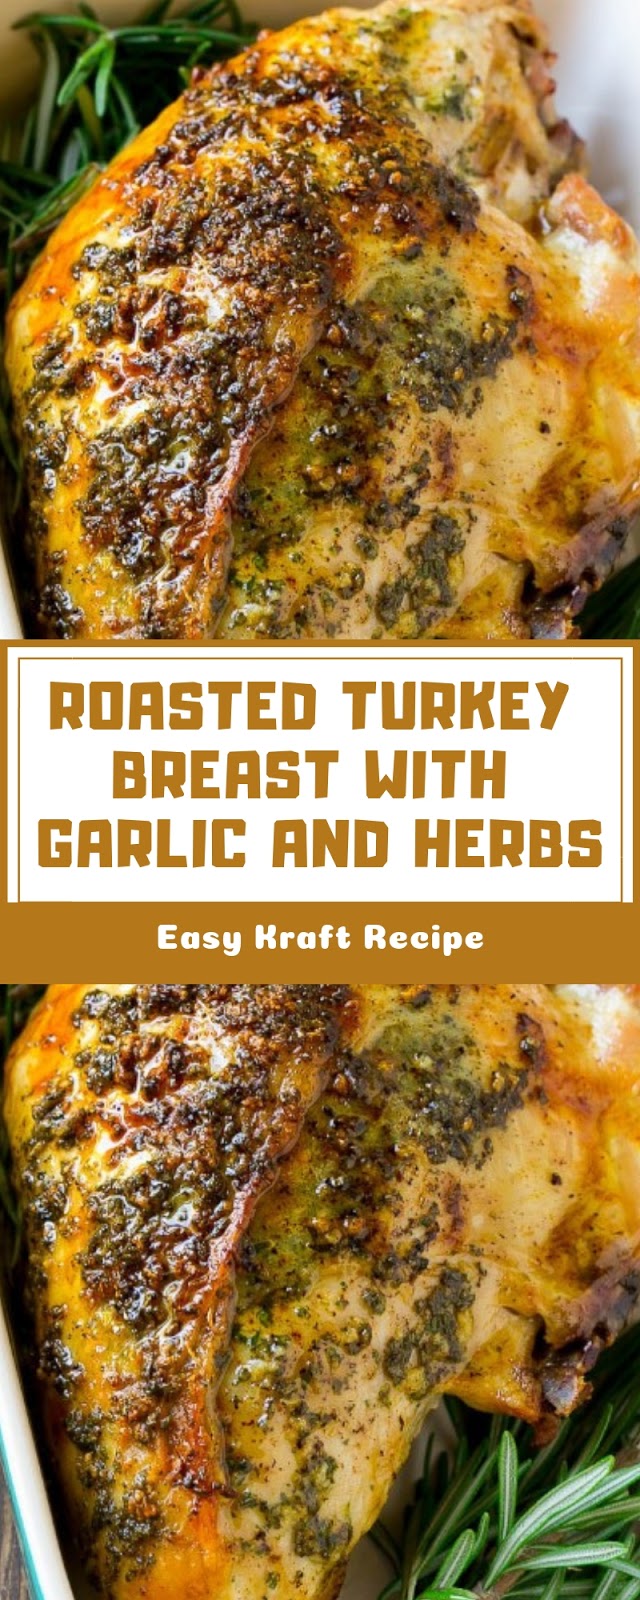 ROASTED TURKEY BREAST WITH GARLIC AND HERBS